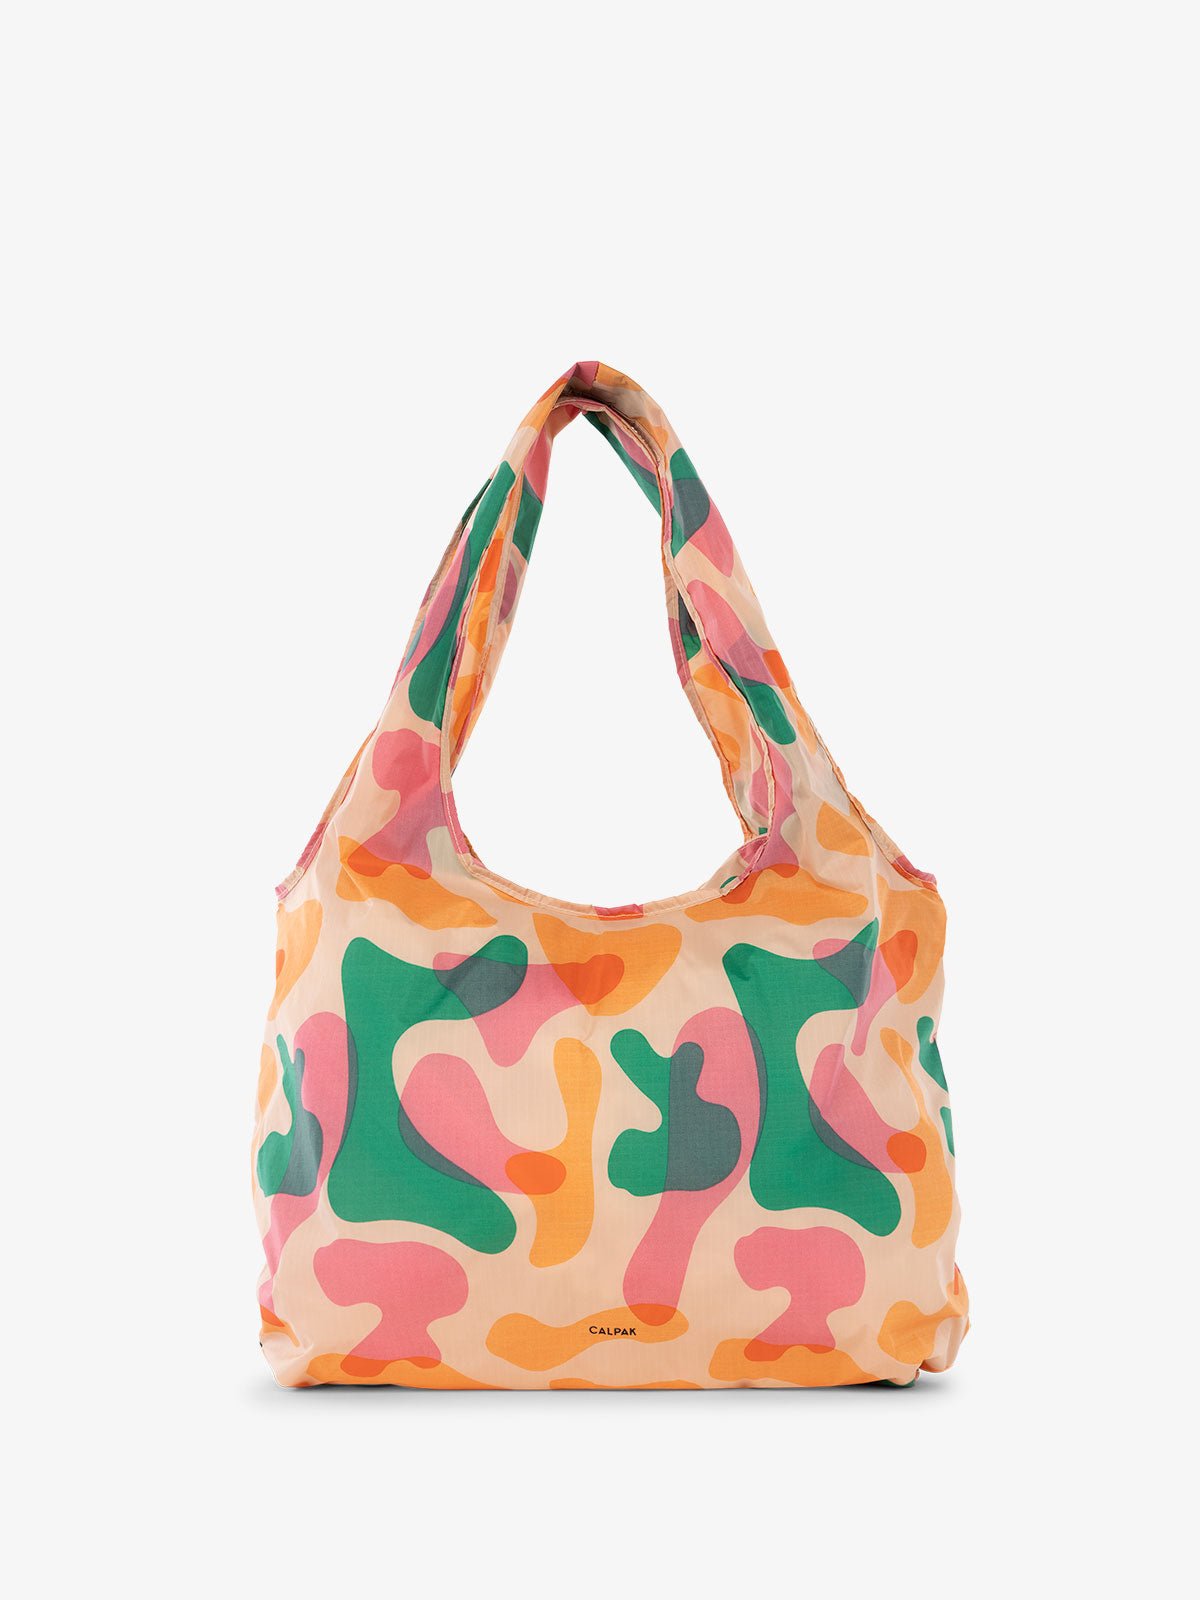 CALPAK Compakt tote bag in modern abstract